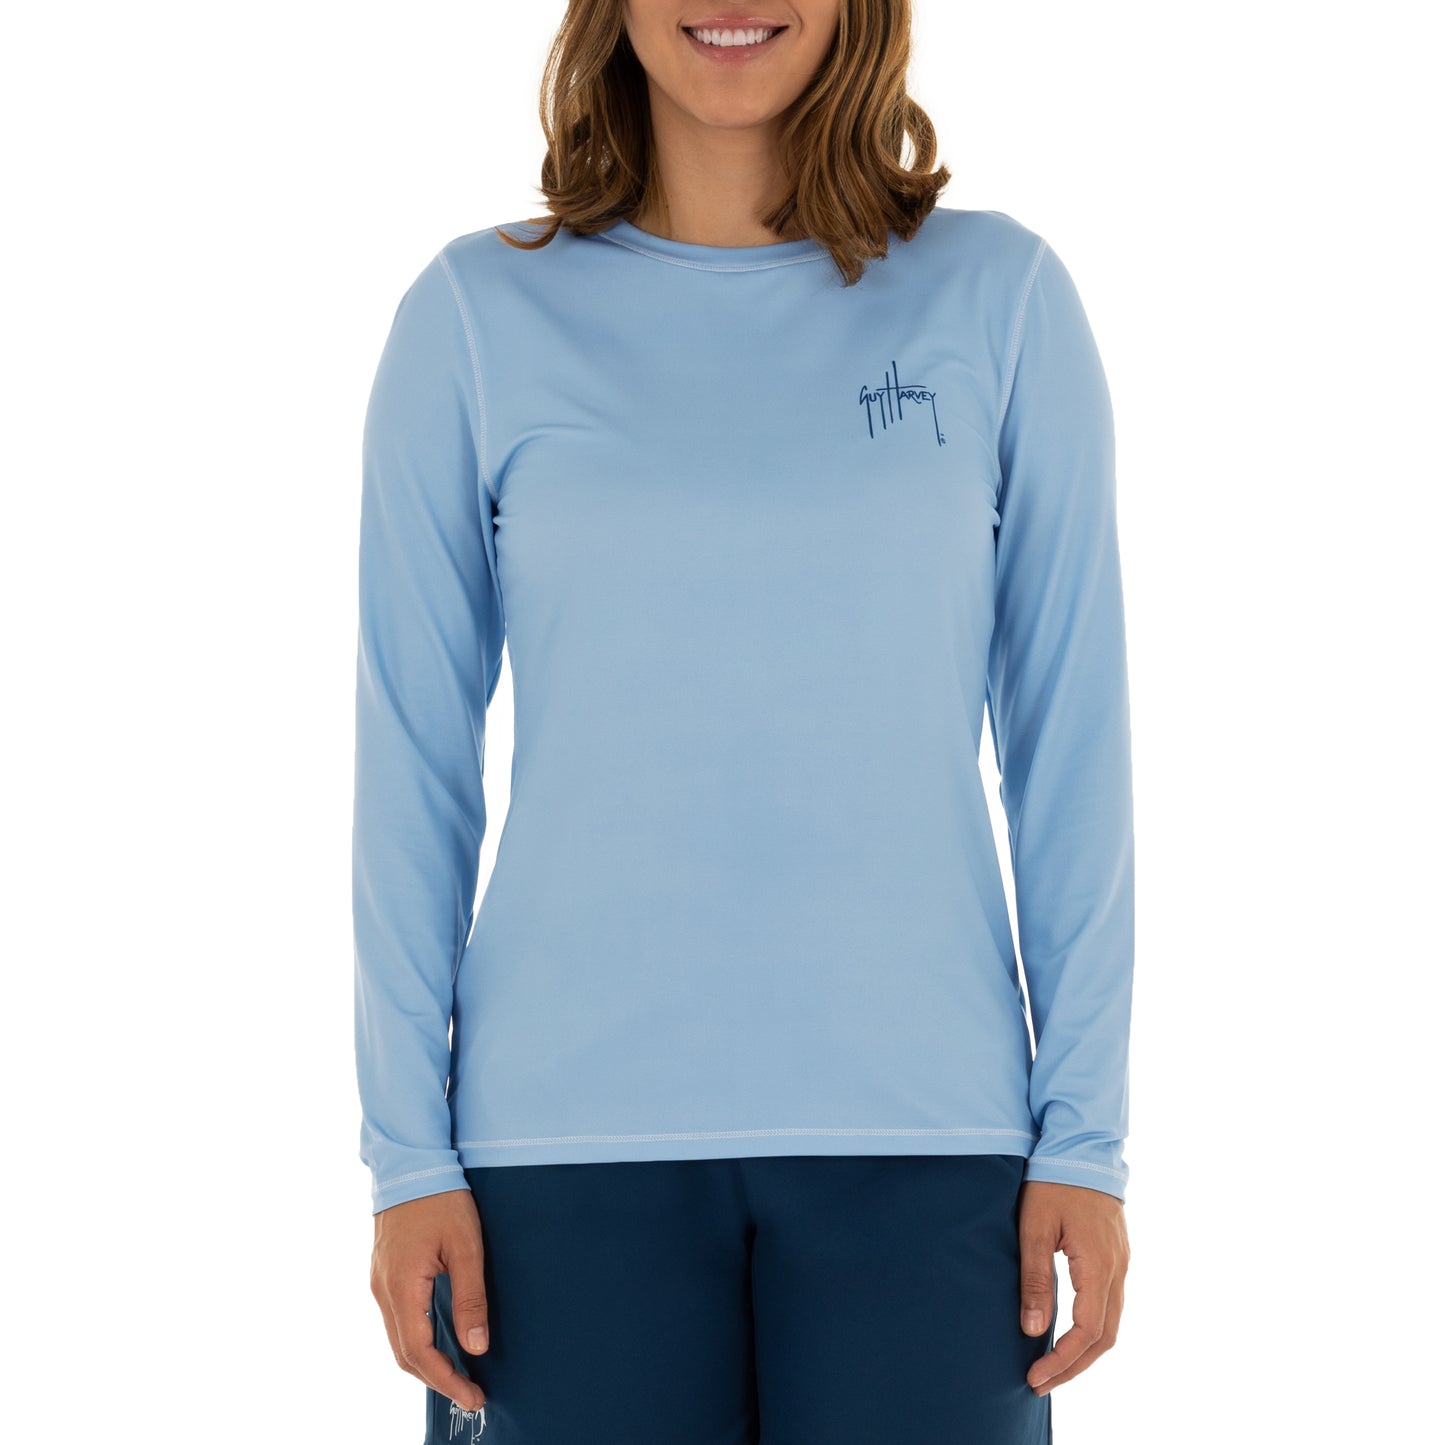 Ladies Lure Americana Long Sleeve Blue Sun Protection Top View 7